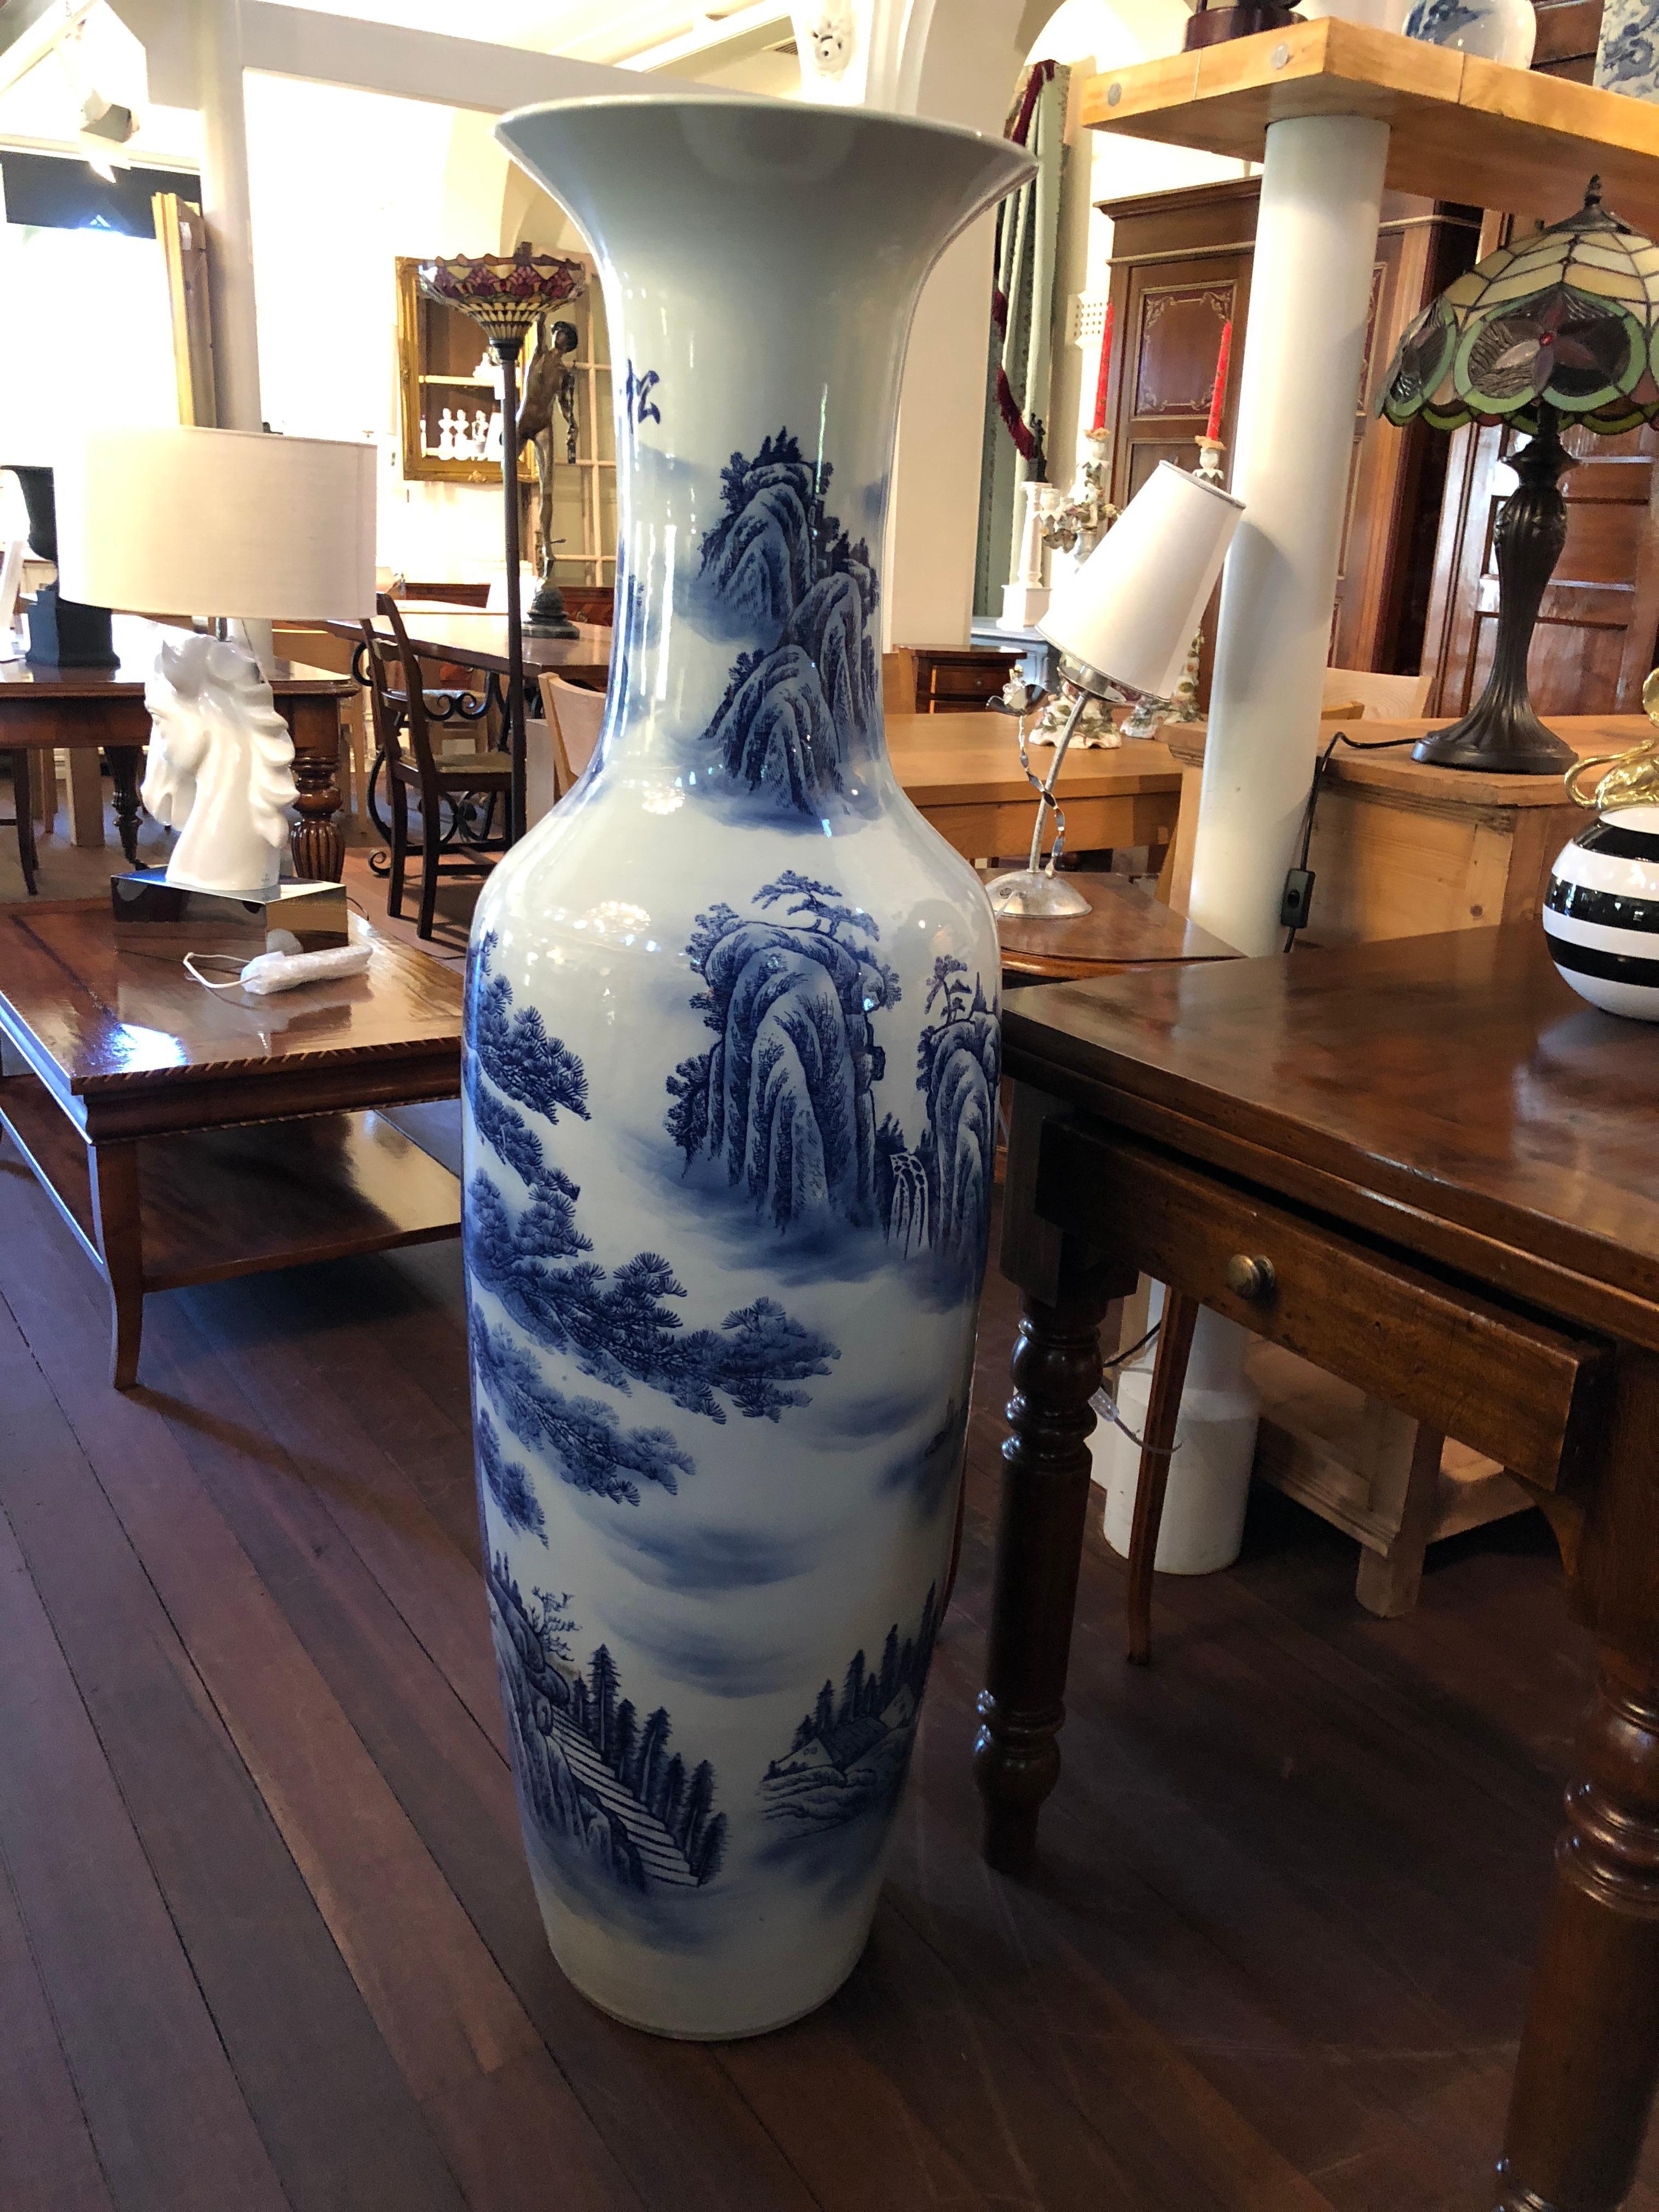 This fine depiction of a grand, traditional Chinese floor vase, features exquisite painterly blue and white mountainous, tree scenes and is structurally sound. Towards the top of the vase, there is Chinese symbols and delicate painted clouds. A